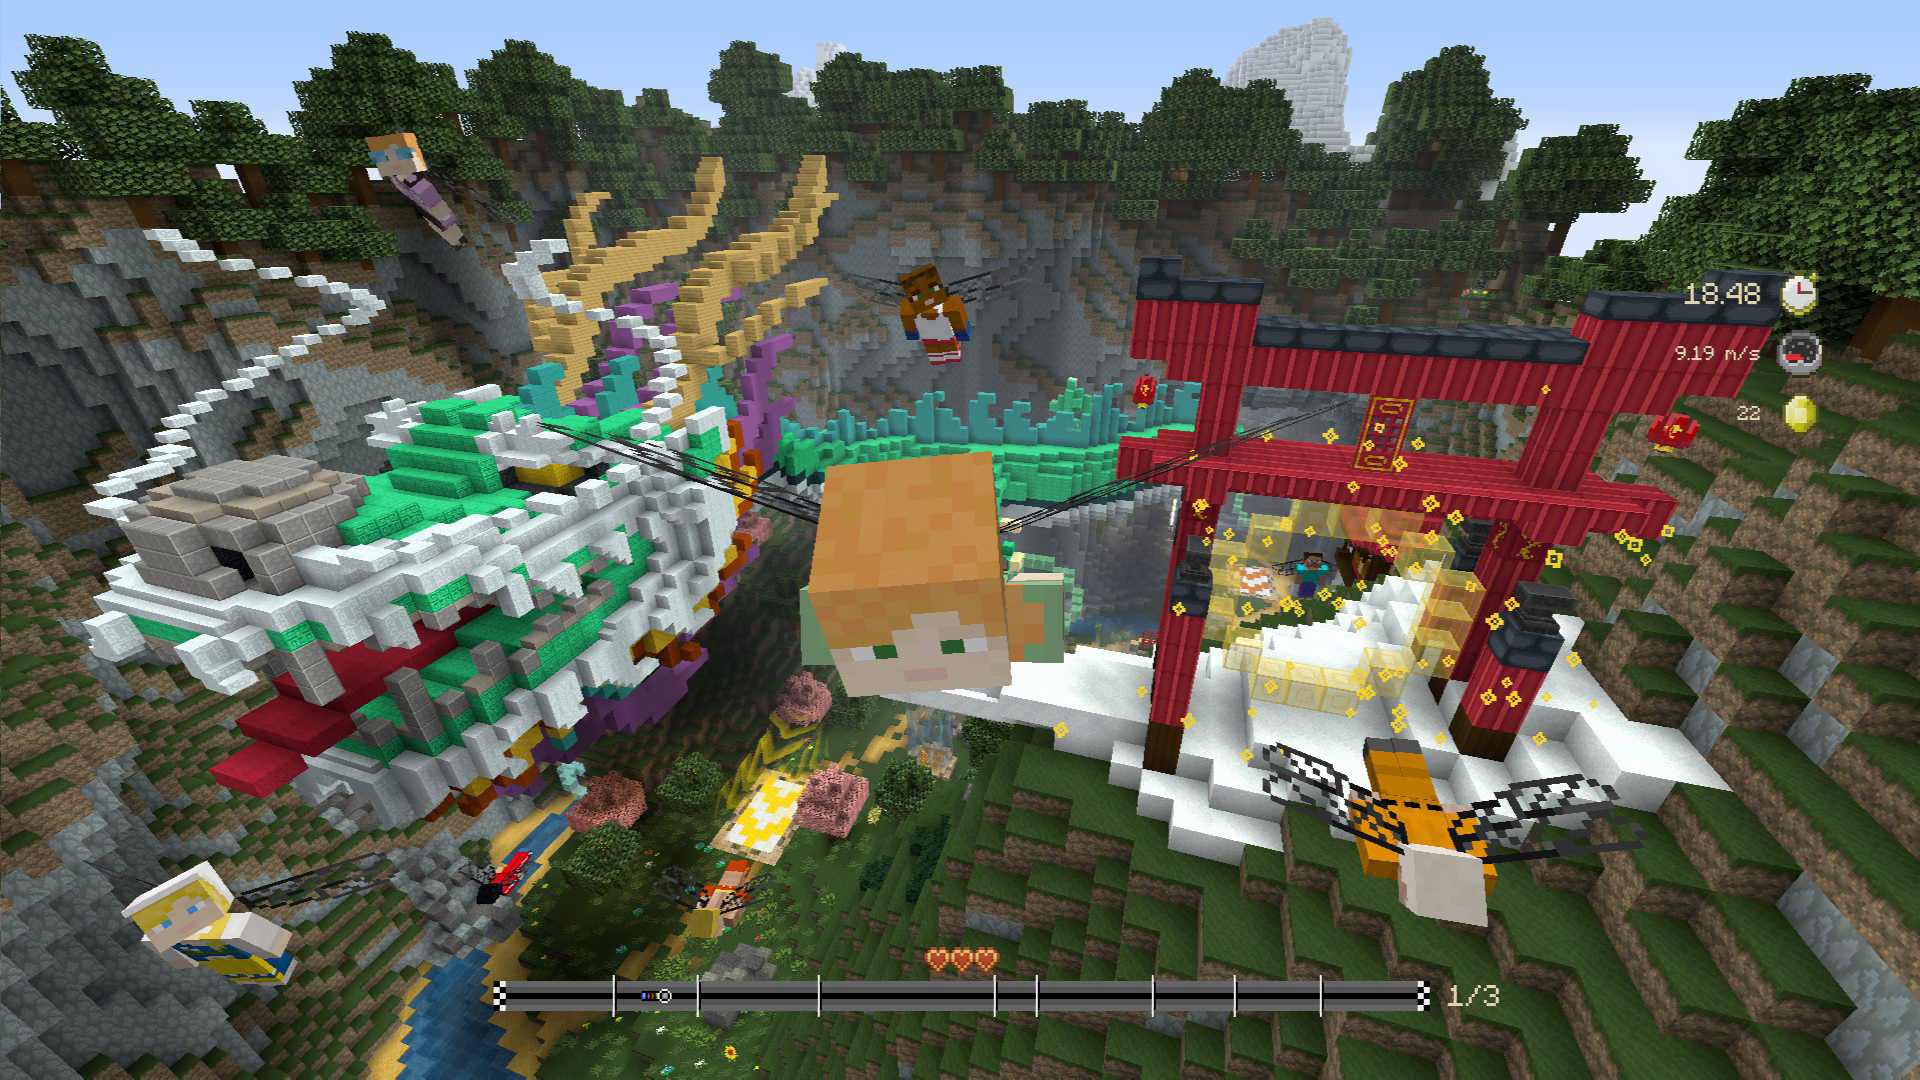 Minecraft Update 52 for Xbox 360 released with new packs